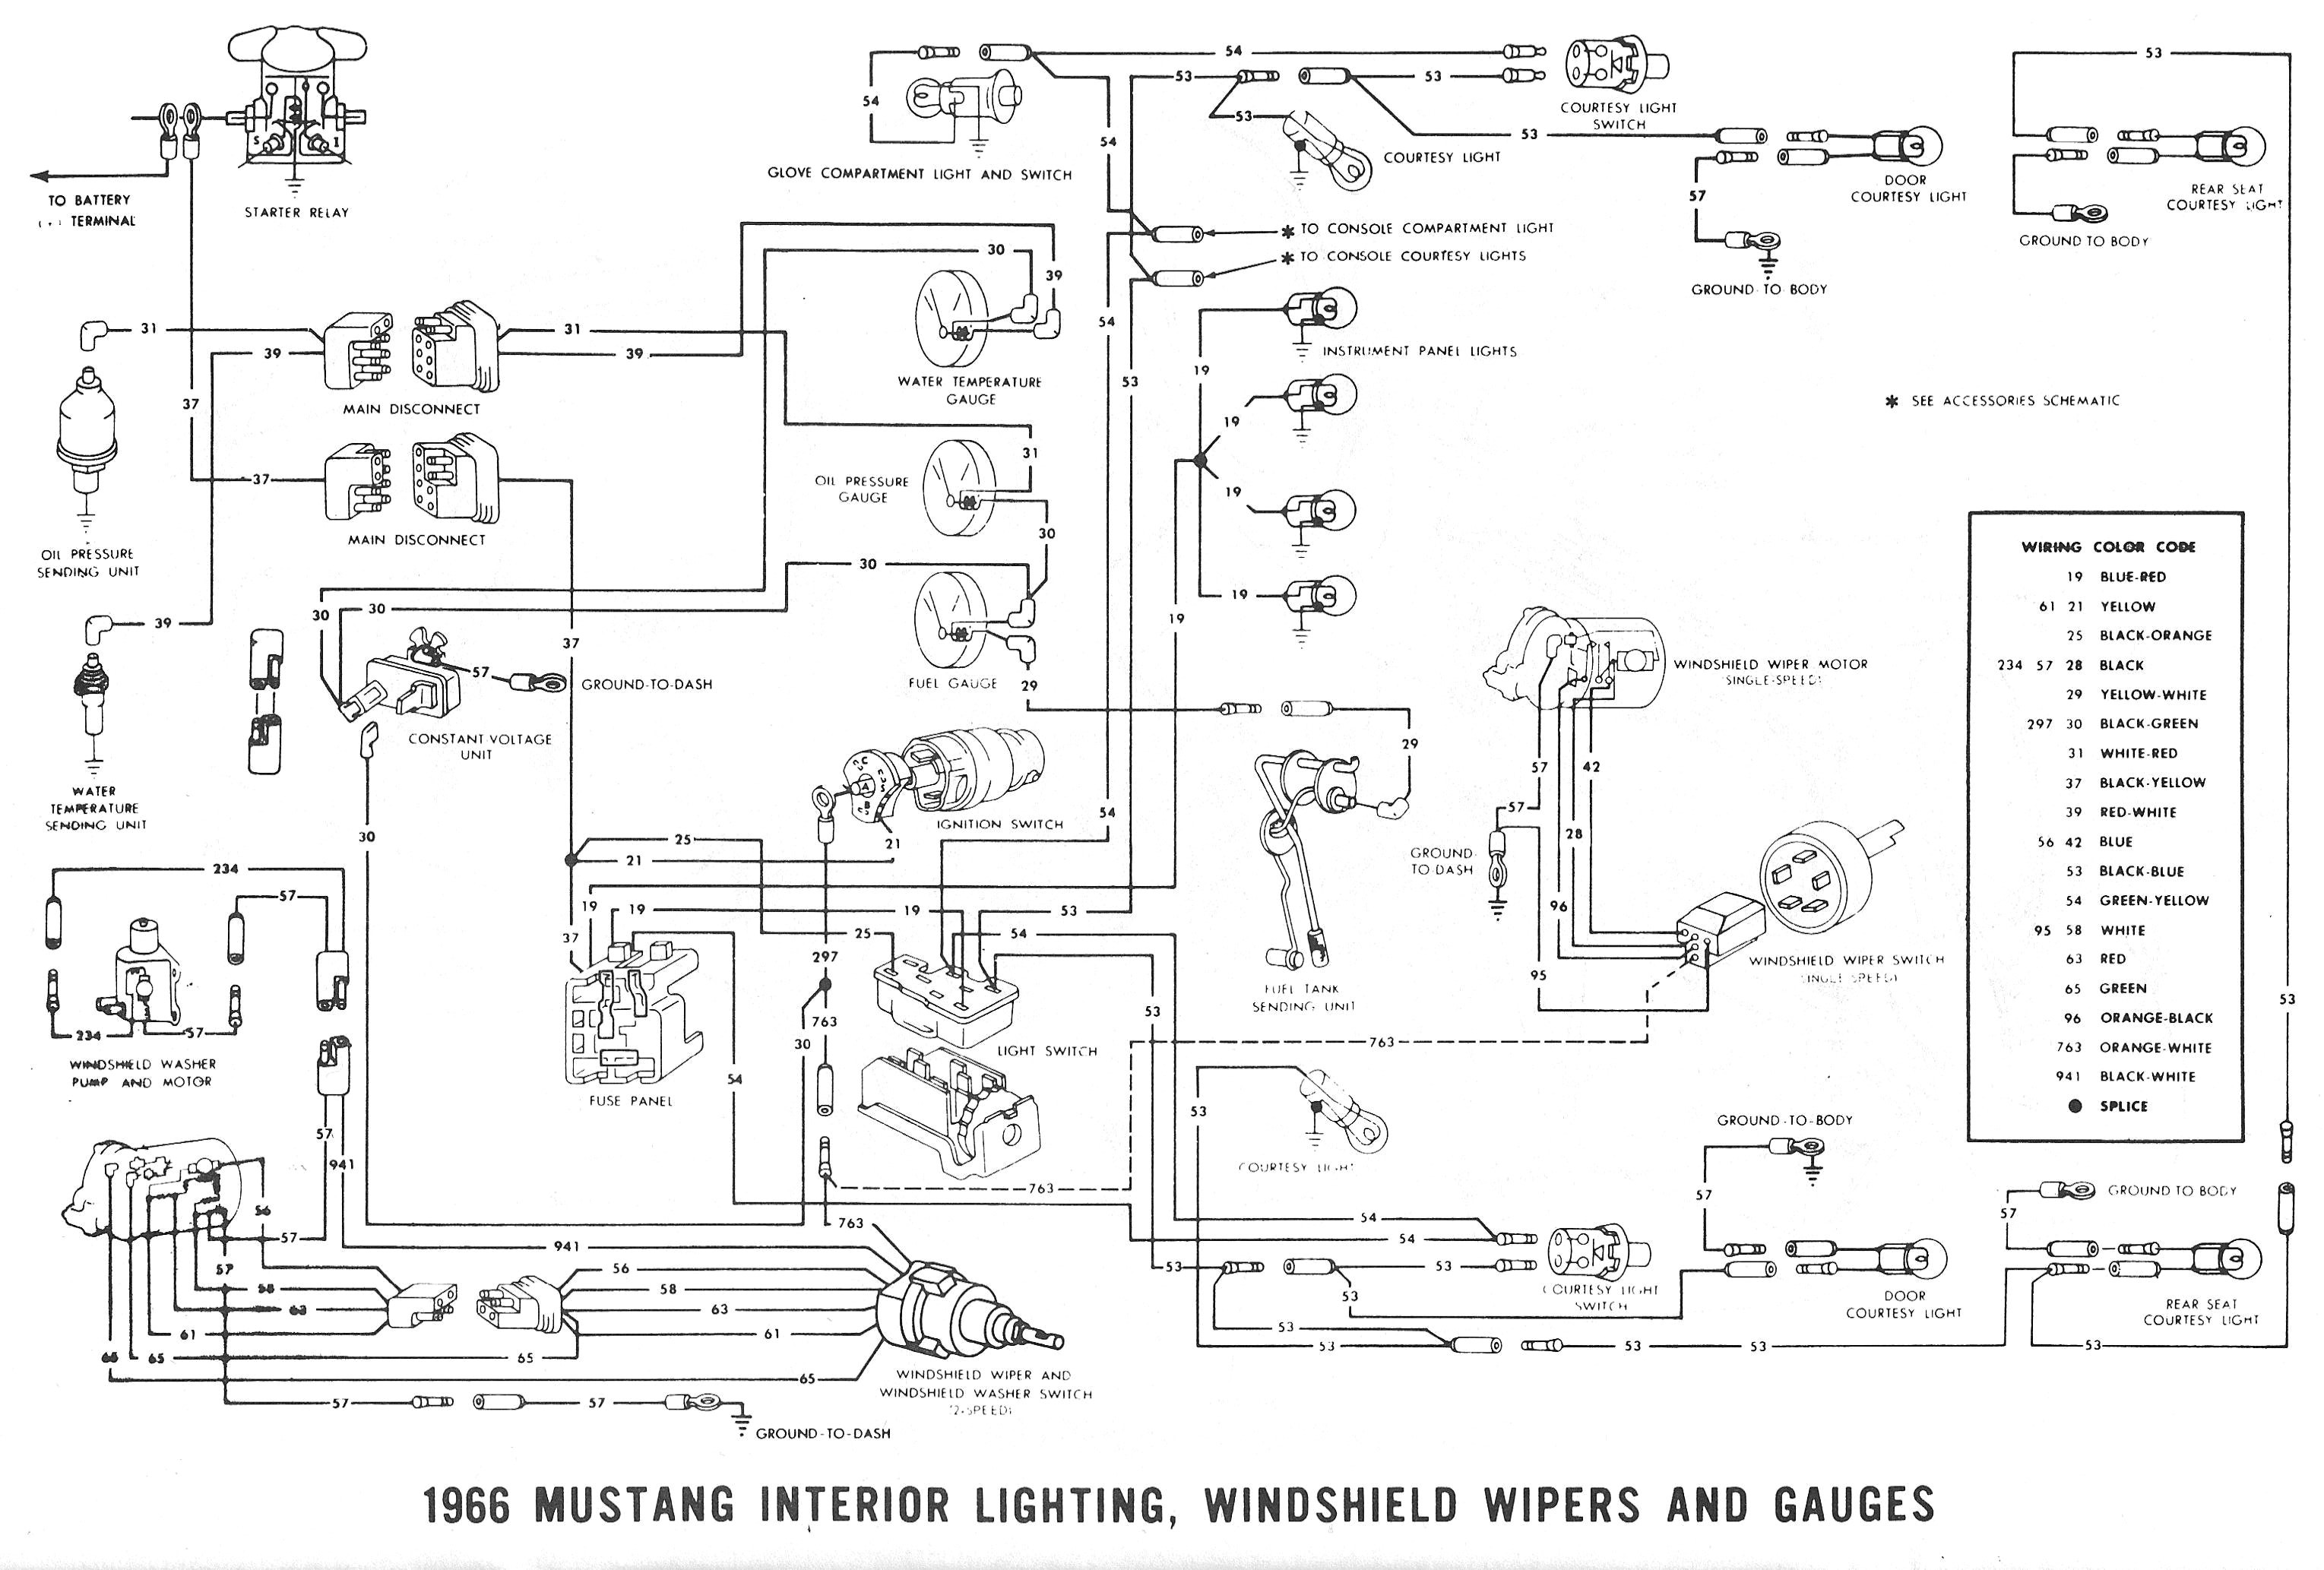 1966 Mustang Ignition Switch Wiring Diagram from detoxicrecenze.com